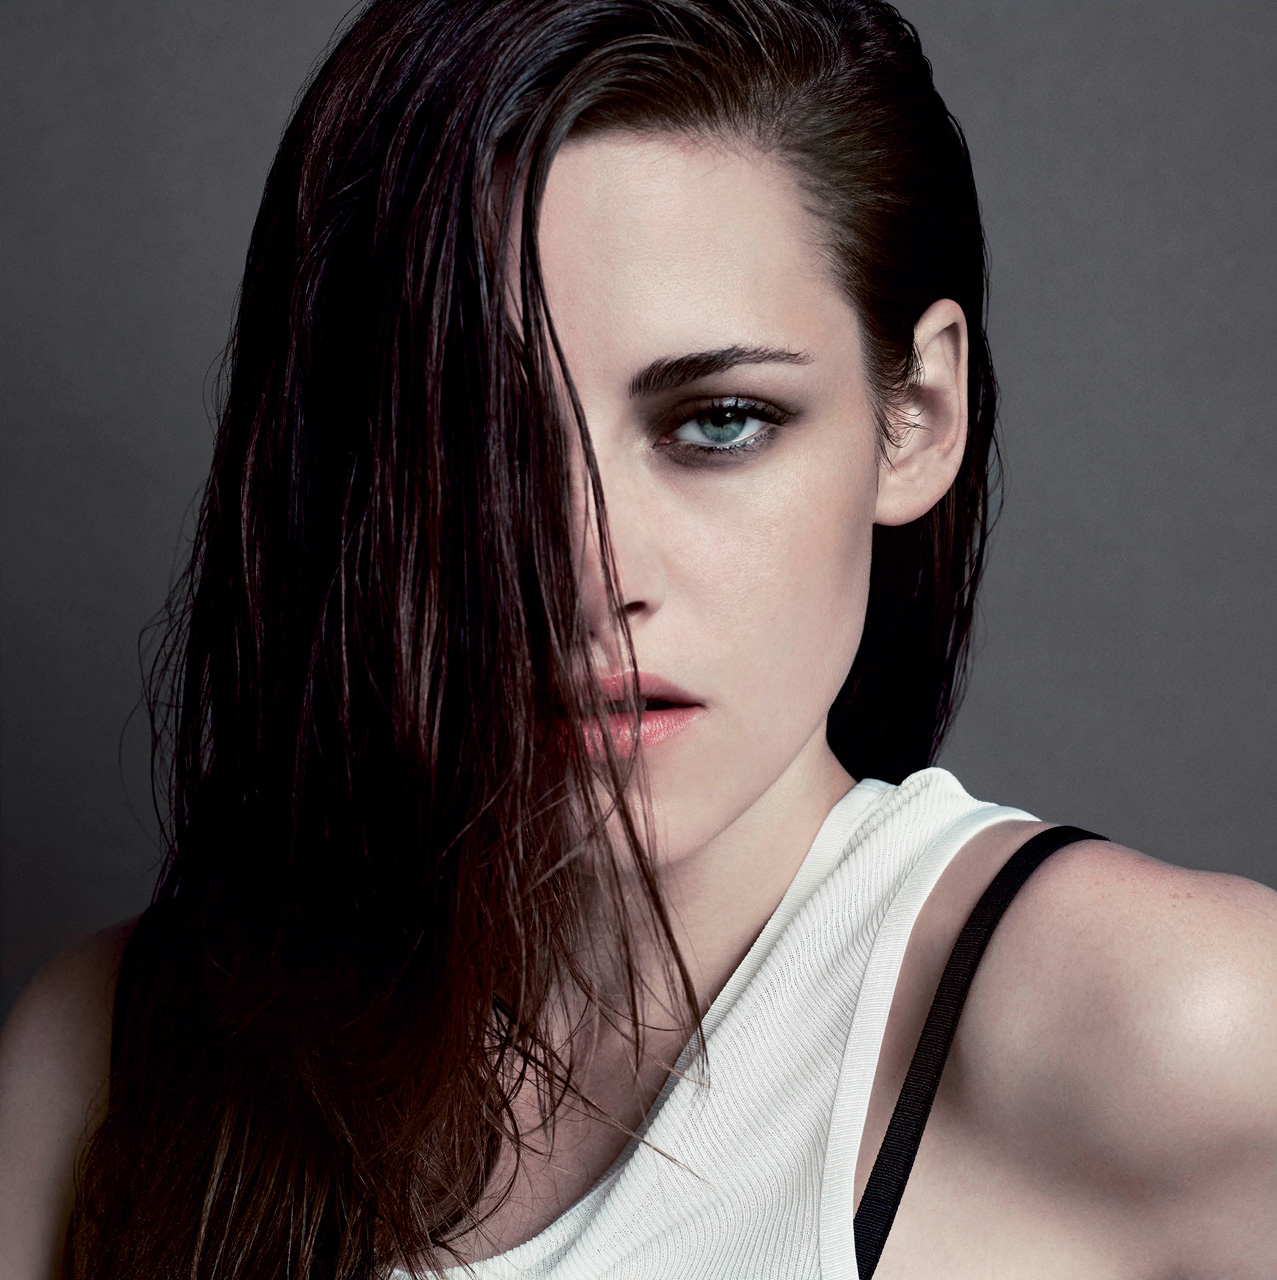 Download this Kristen Stewart Takes The Latest Cover Magazine With Session picture